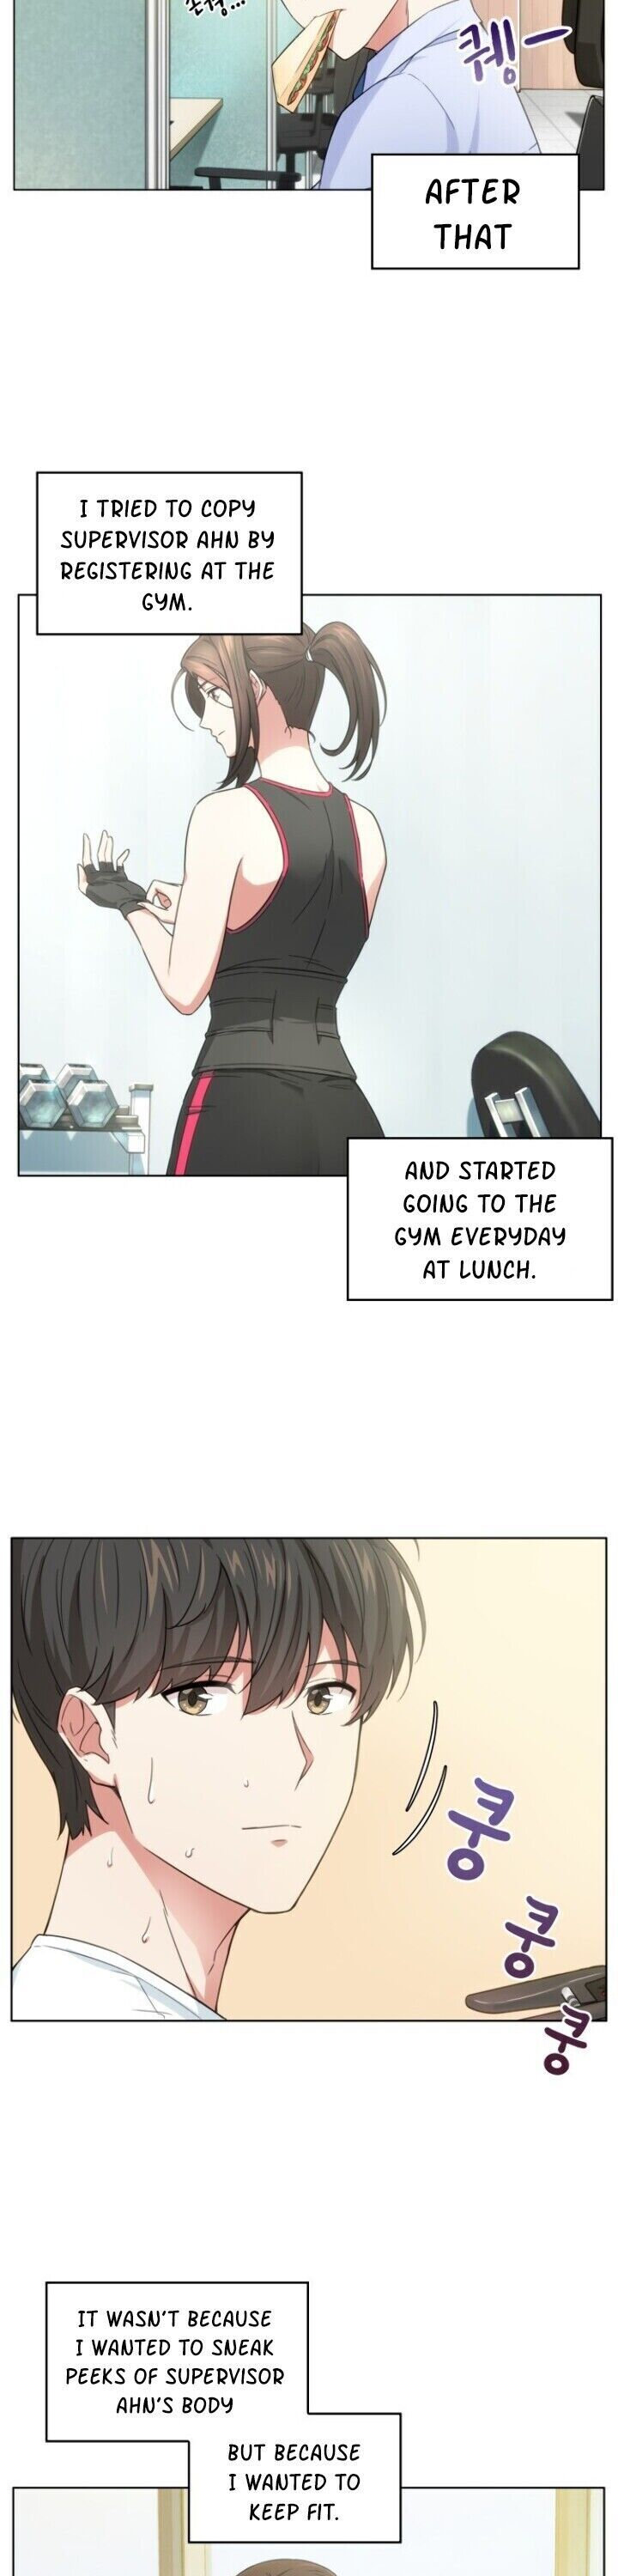 My Office Noona’s Story - Chapter 4 Page 11